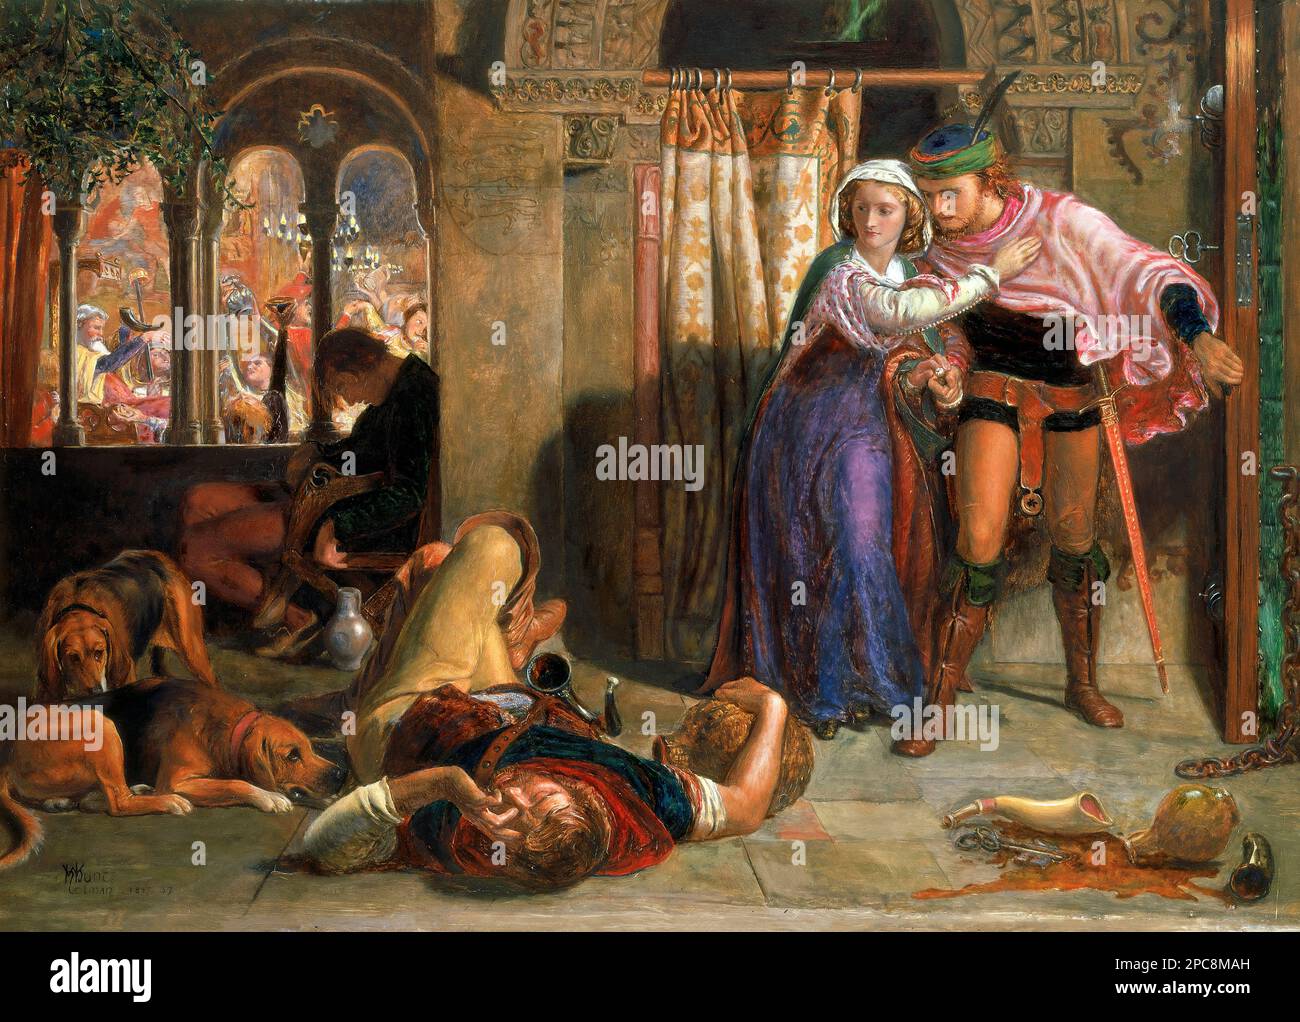 'The flight of Madeline and Porphyro during the drunkenness attending the revelry (The Eve of St. Agnes)' by William Holman Hunt (1827-1910), oil on panel, c. 1847-57. Holman Hunt was a leading figure in the 19th century Pre-Raphaelite Movement. Stock Photo